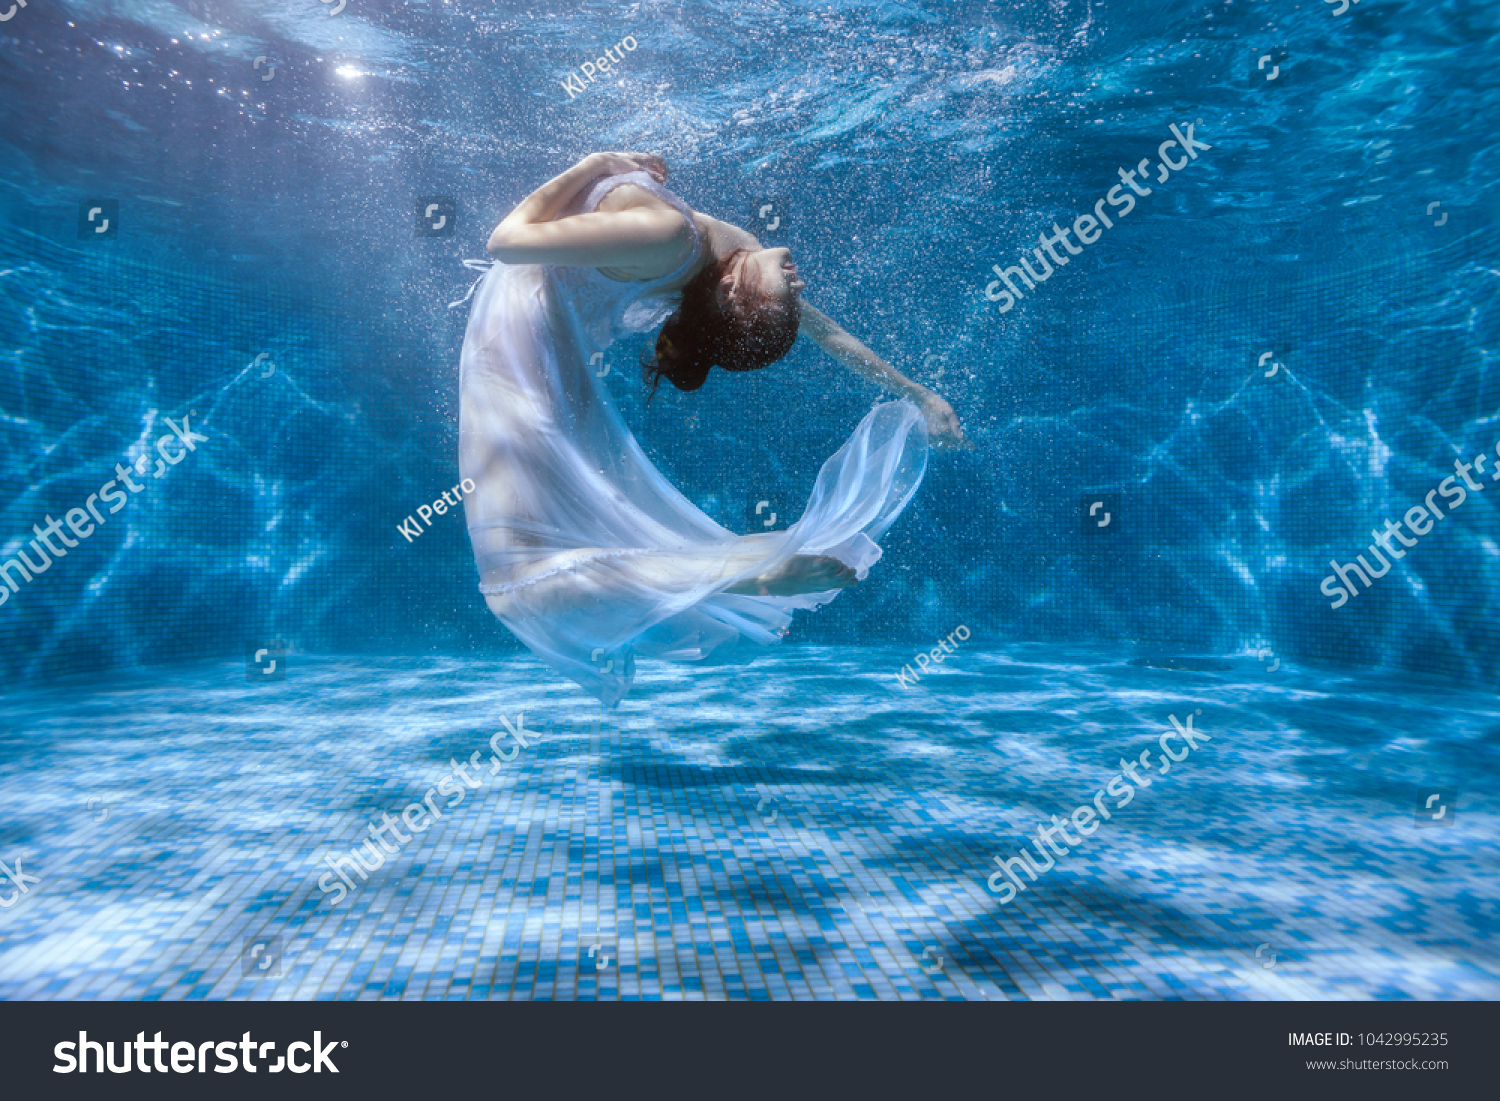 Girl shows the performance under the water, she dances in a white dress. #1042995235